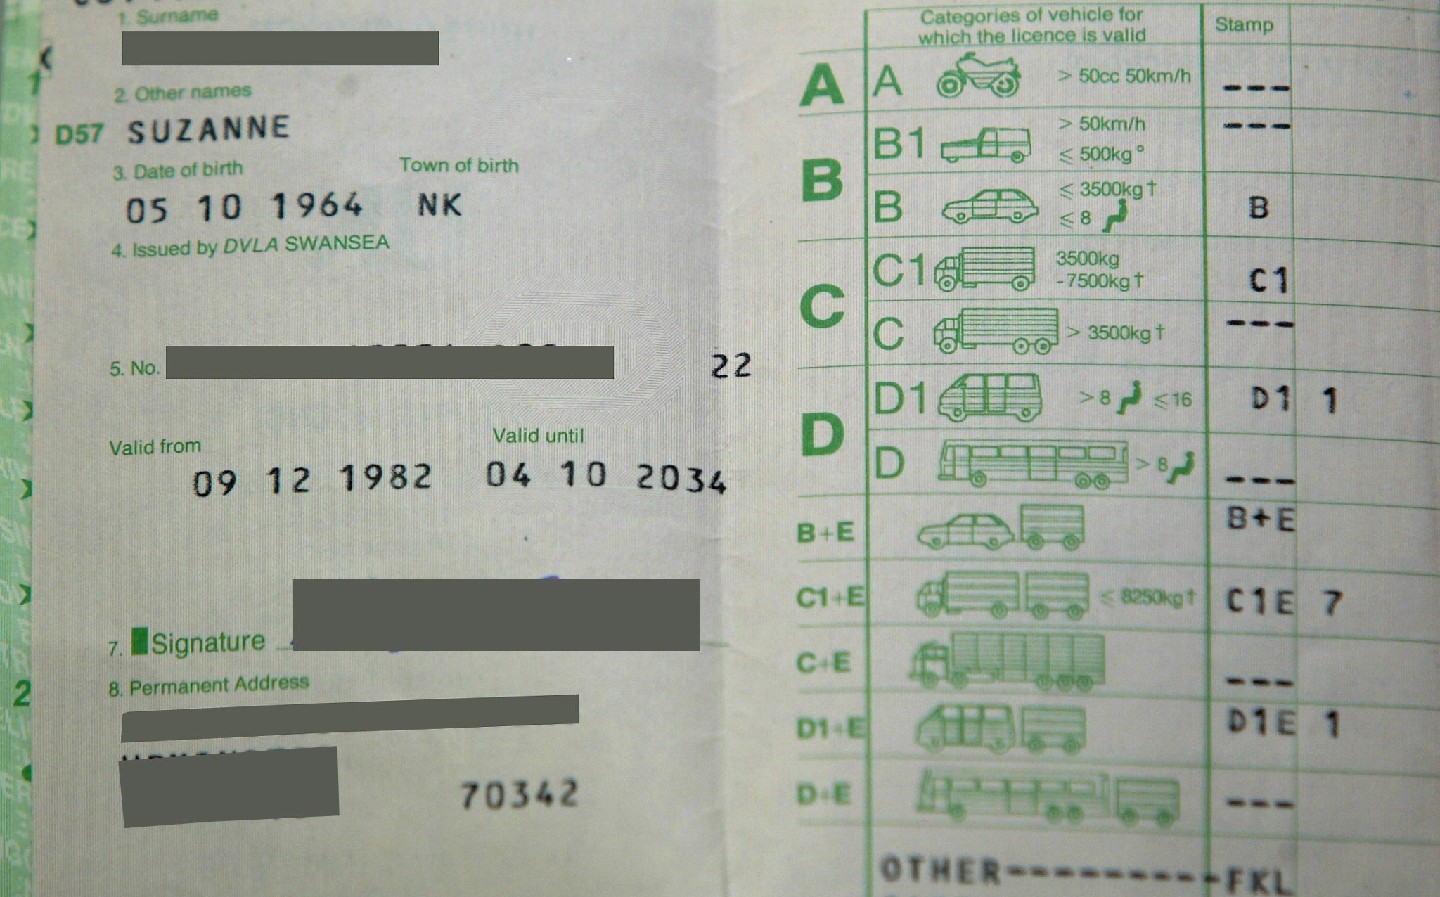 Are old-style paper driving licences still valid?